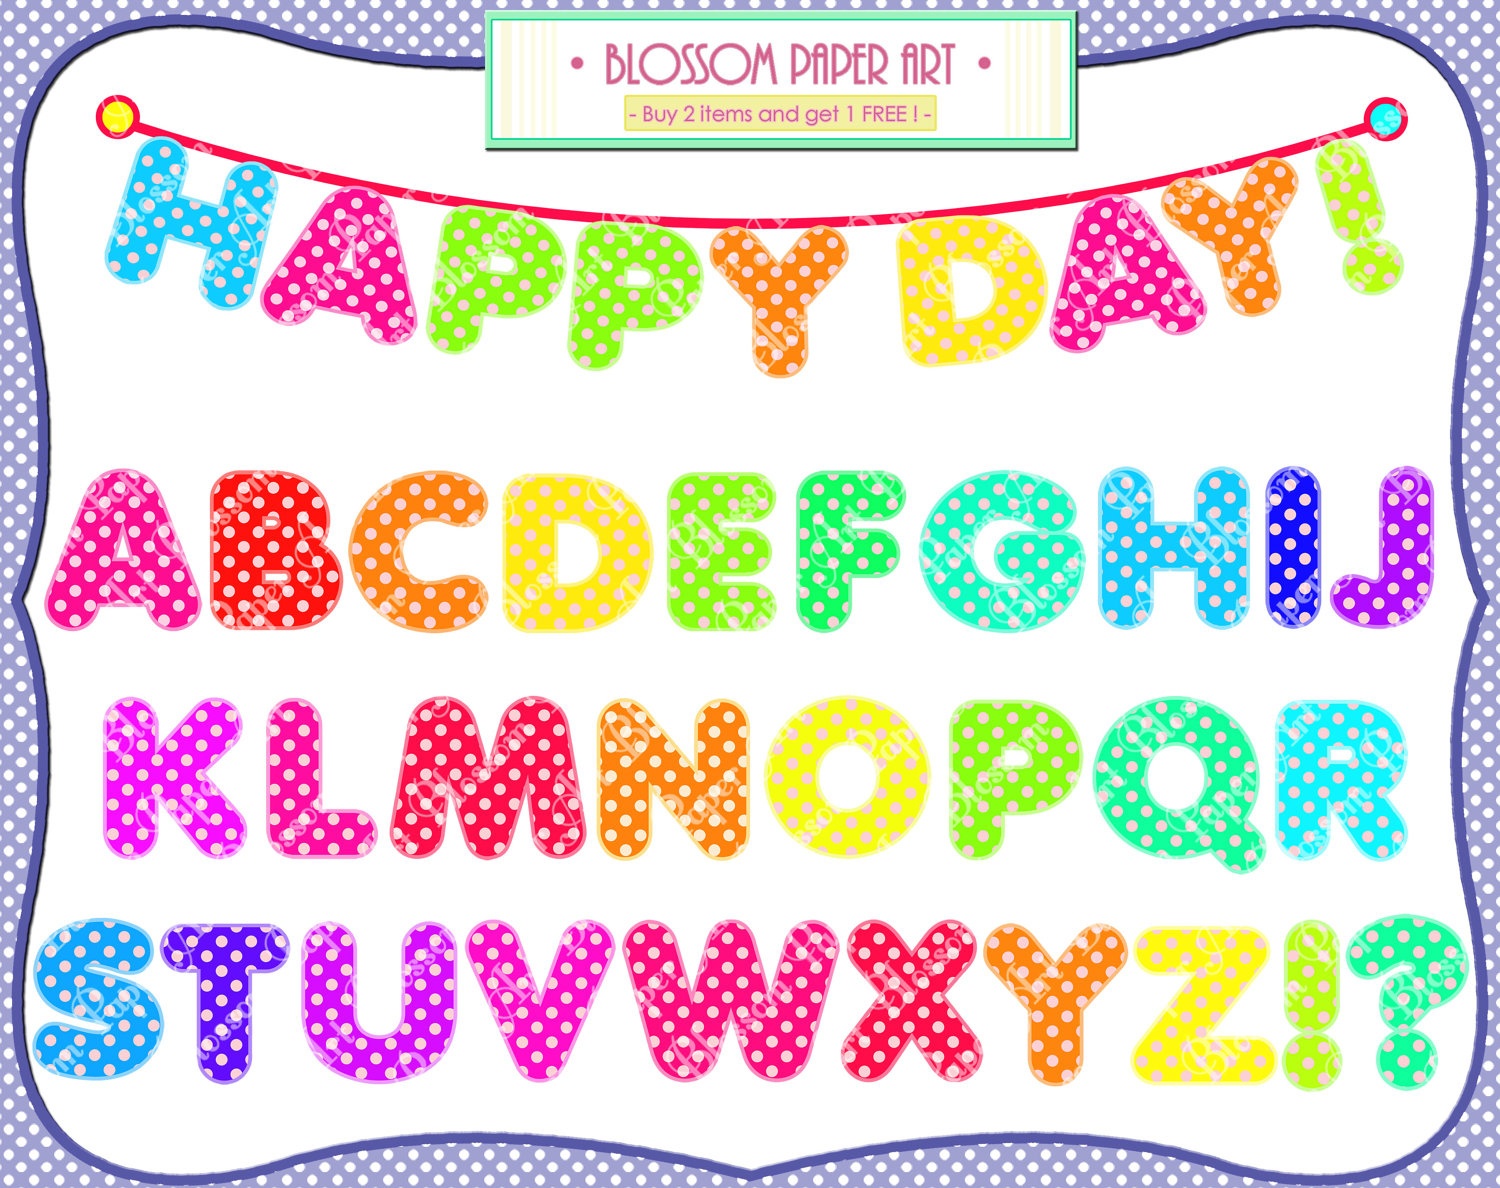 Free Printable Alphabet Cliparts, Download Free Clip Art, Free Clip - Free Printable Photo Letter Art